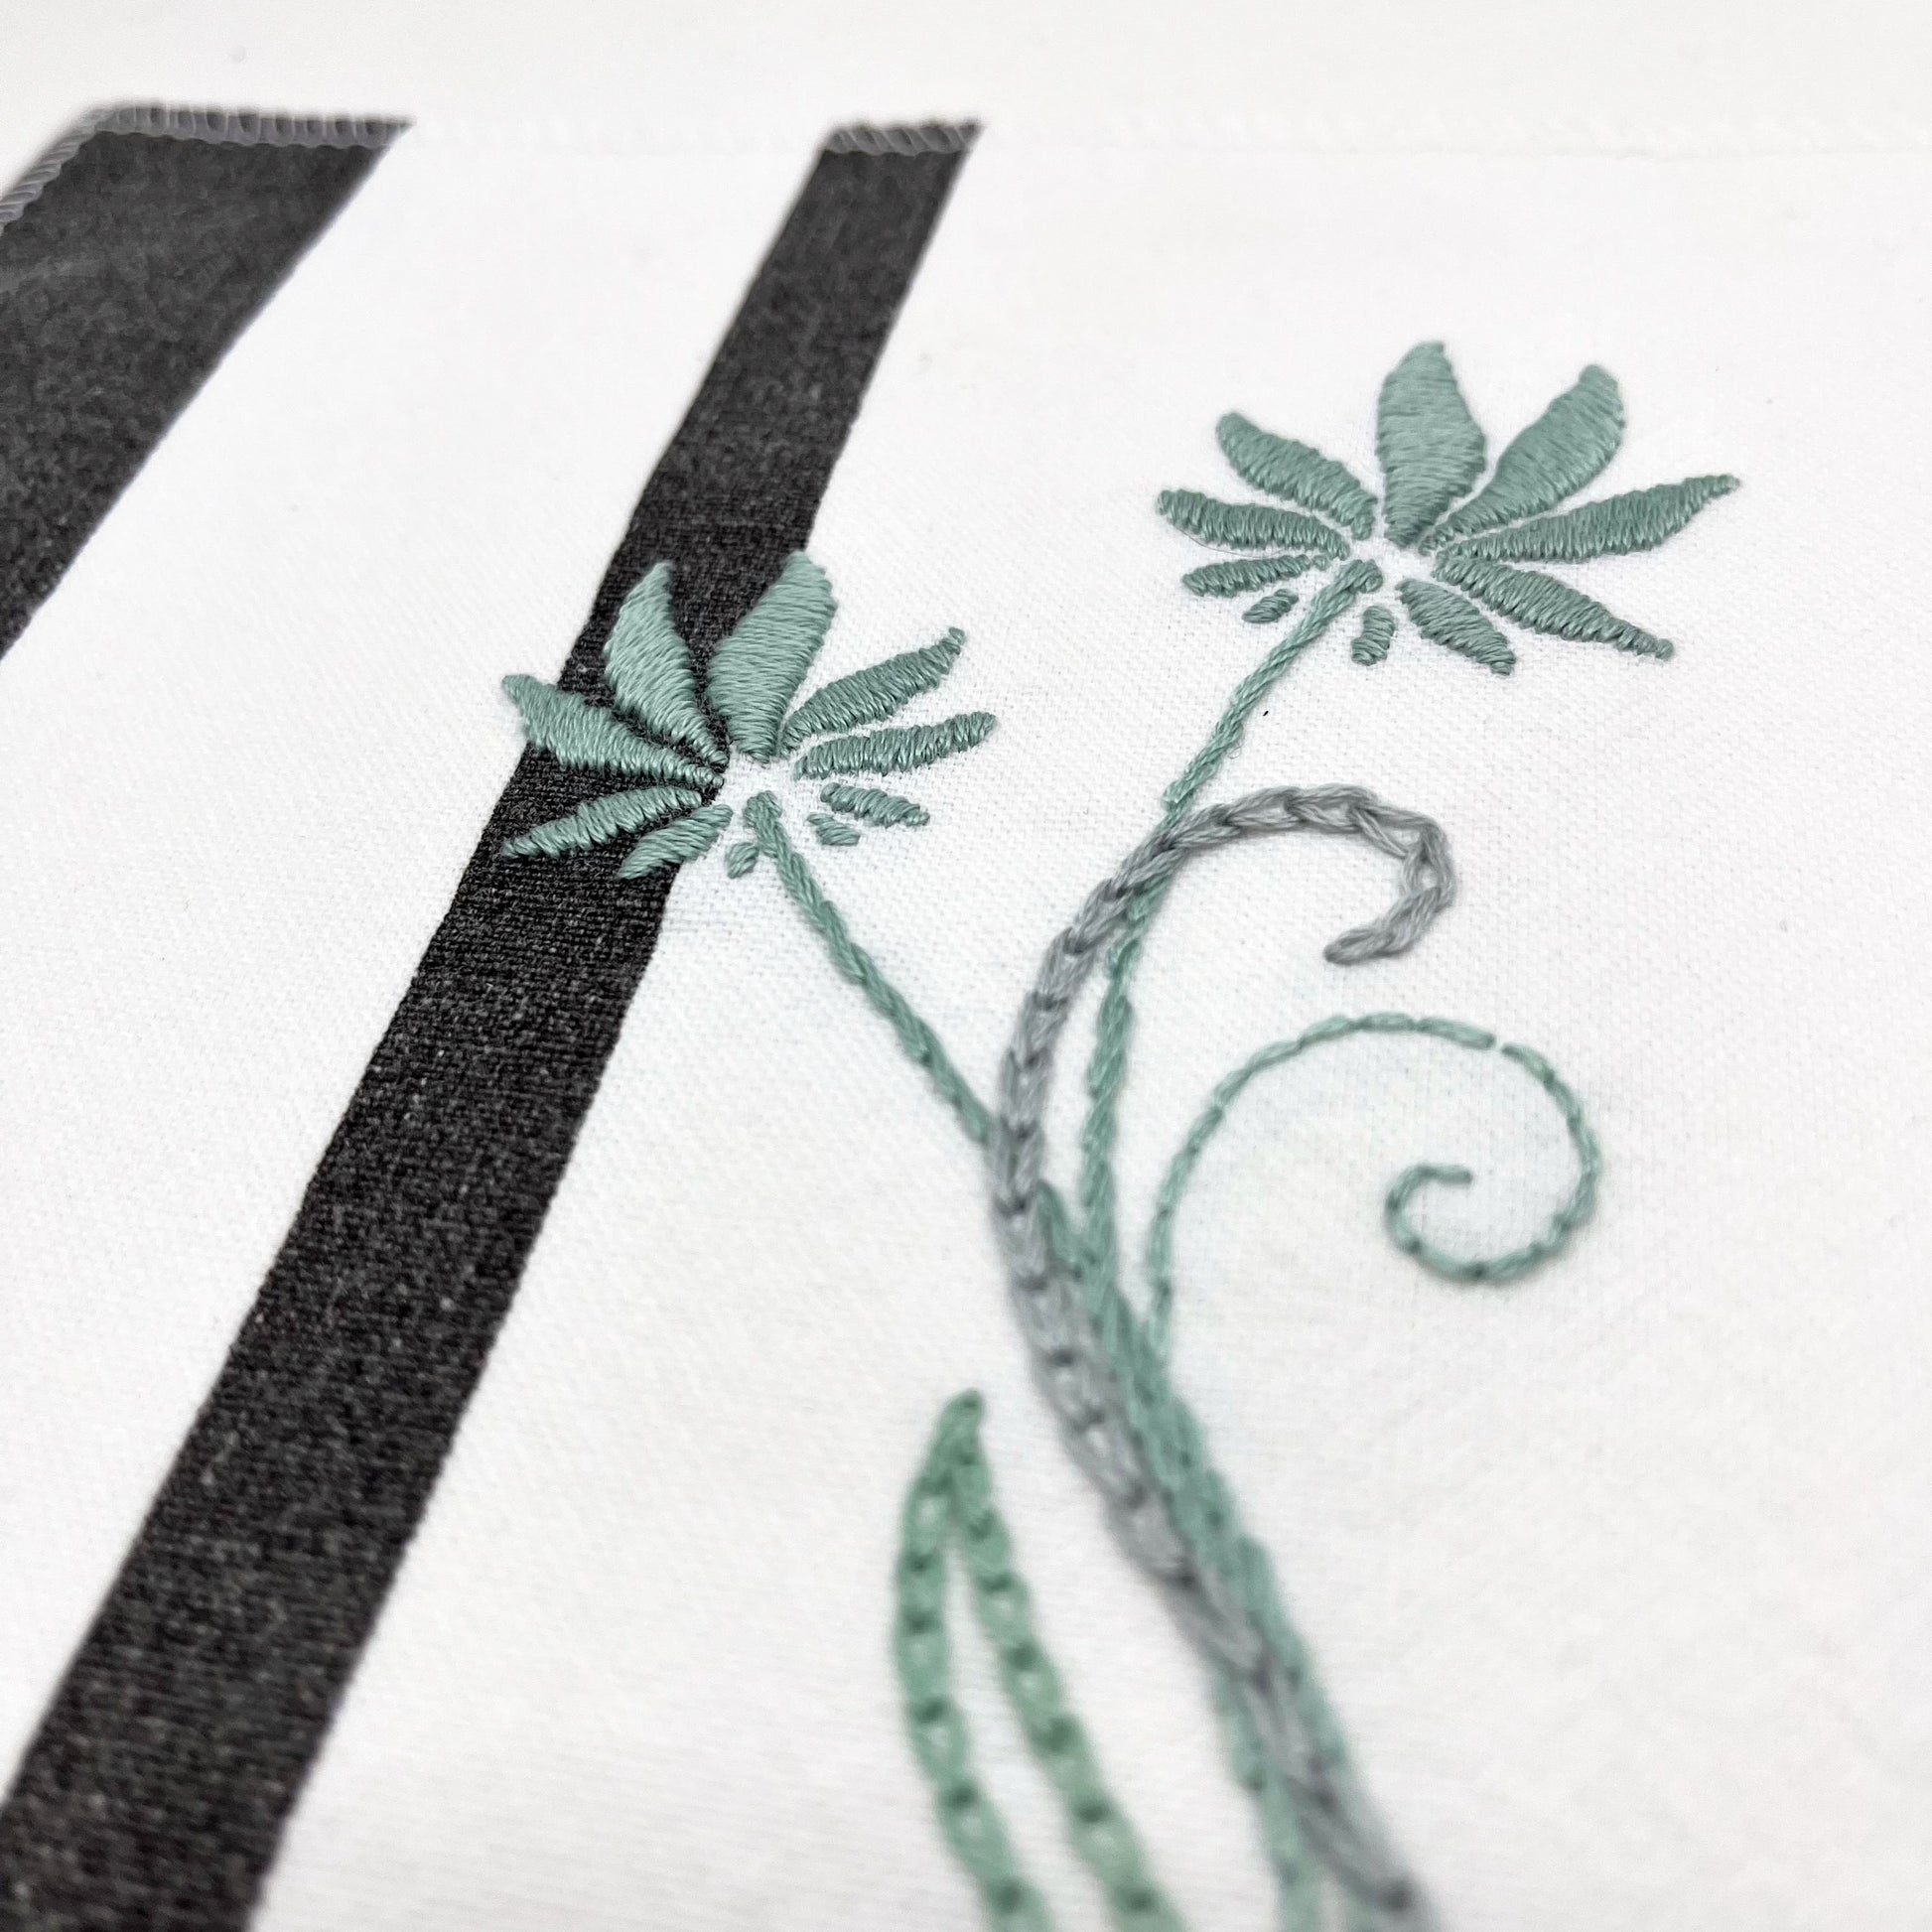 close up angled view of a fabric wall hanging made out of white fabric with black vertical stripes, hand stitched with flowers in shades of sage with long curvy stems in chainstitch, backstitch and stem stitch, on a white background